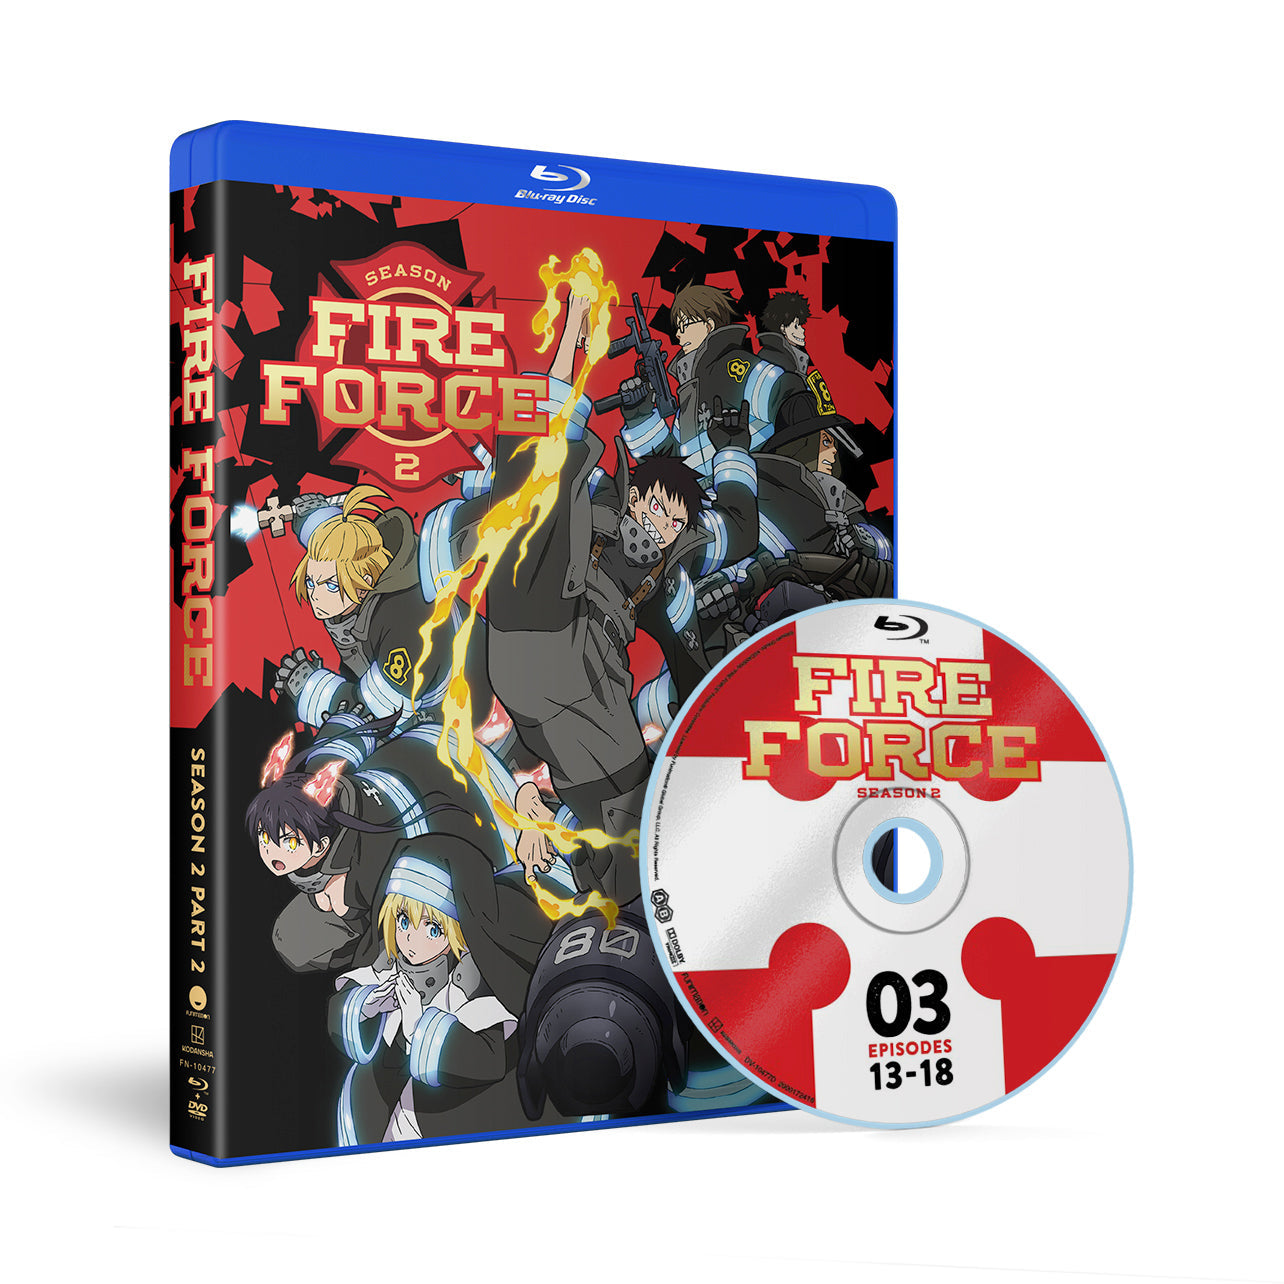 Fire Force - Season 2 Part 2 - Blu-ray + DVD image count 1